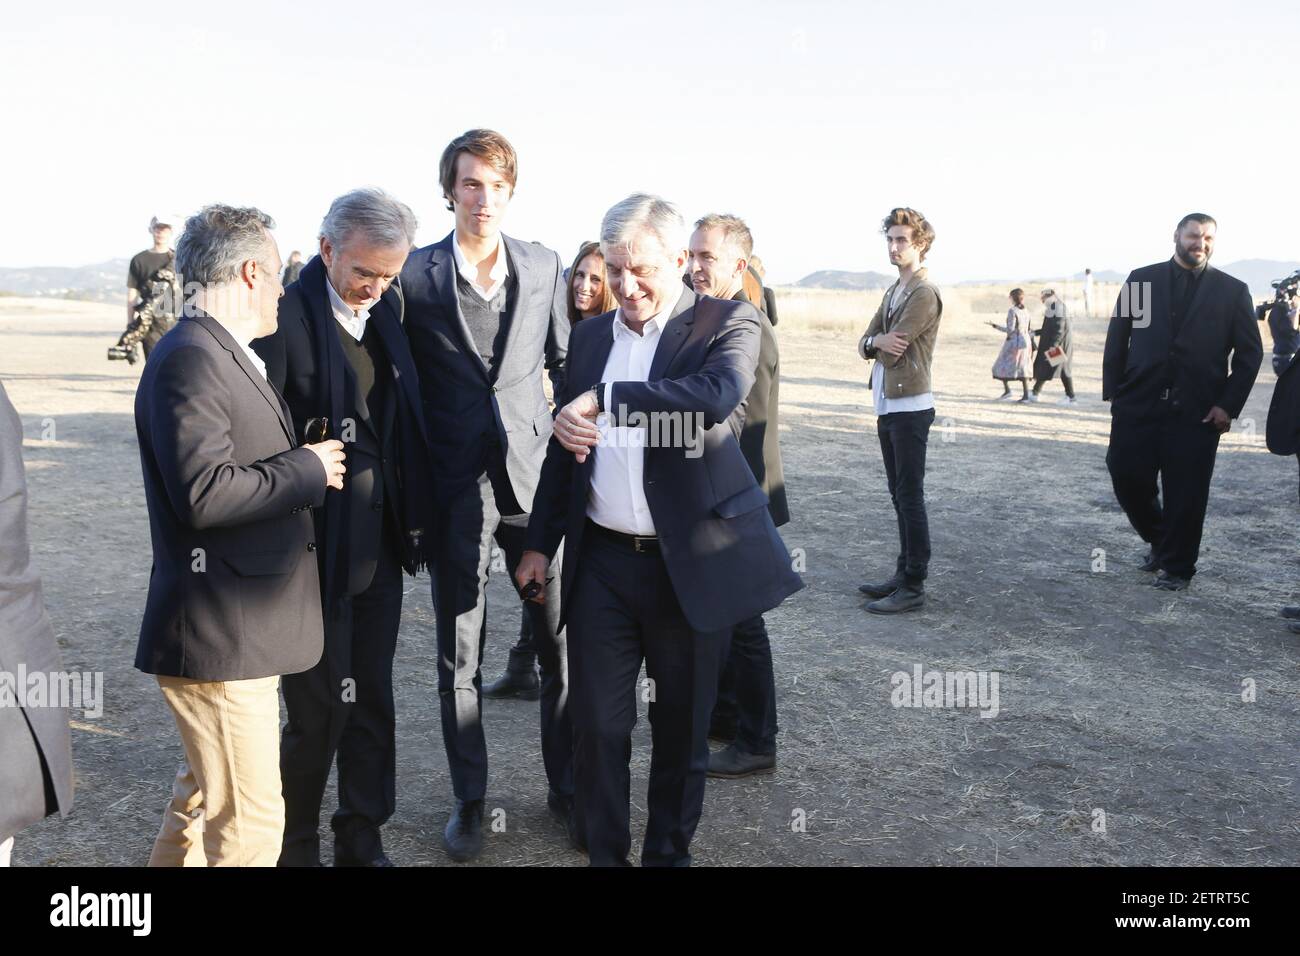 LVMH, Louis Vuitton and Christian Dior inaugurate Les Fontaines